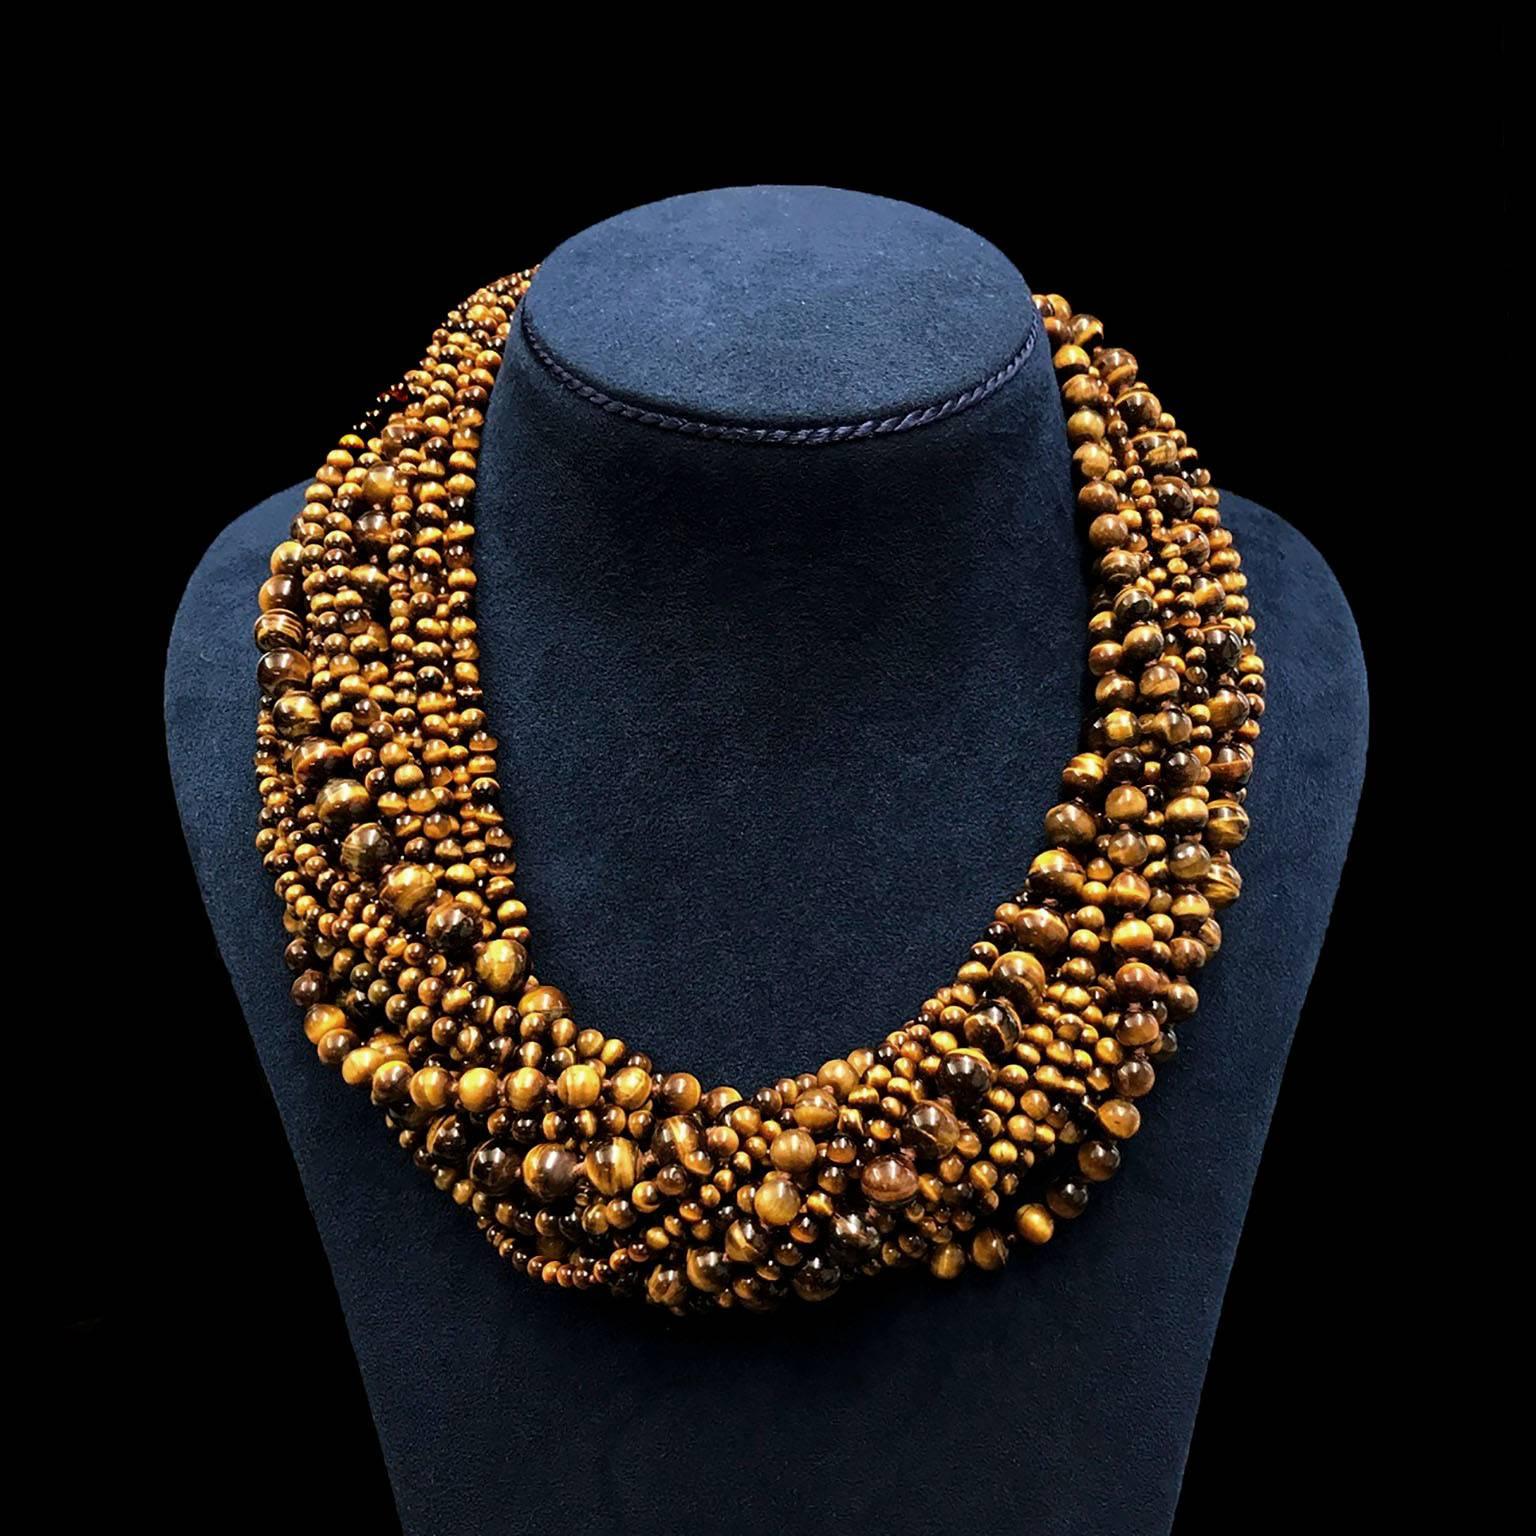 Valentin Magro Tiger's Eye Bead Multi Strand Necklace with Gold Clasp abounds with phenomenal jewels. The gem of choice is tiger’s eye quartz, famed for its chatoyant stripes. They’re carved into beads of various diameters before they’re strung with